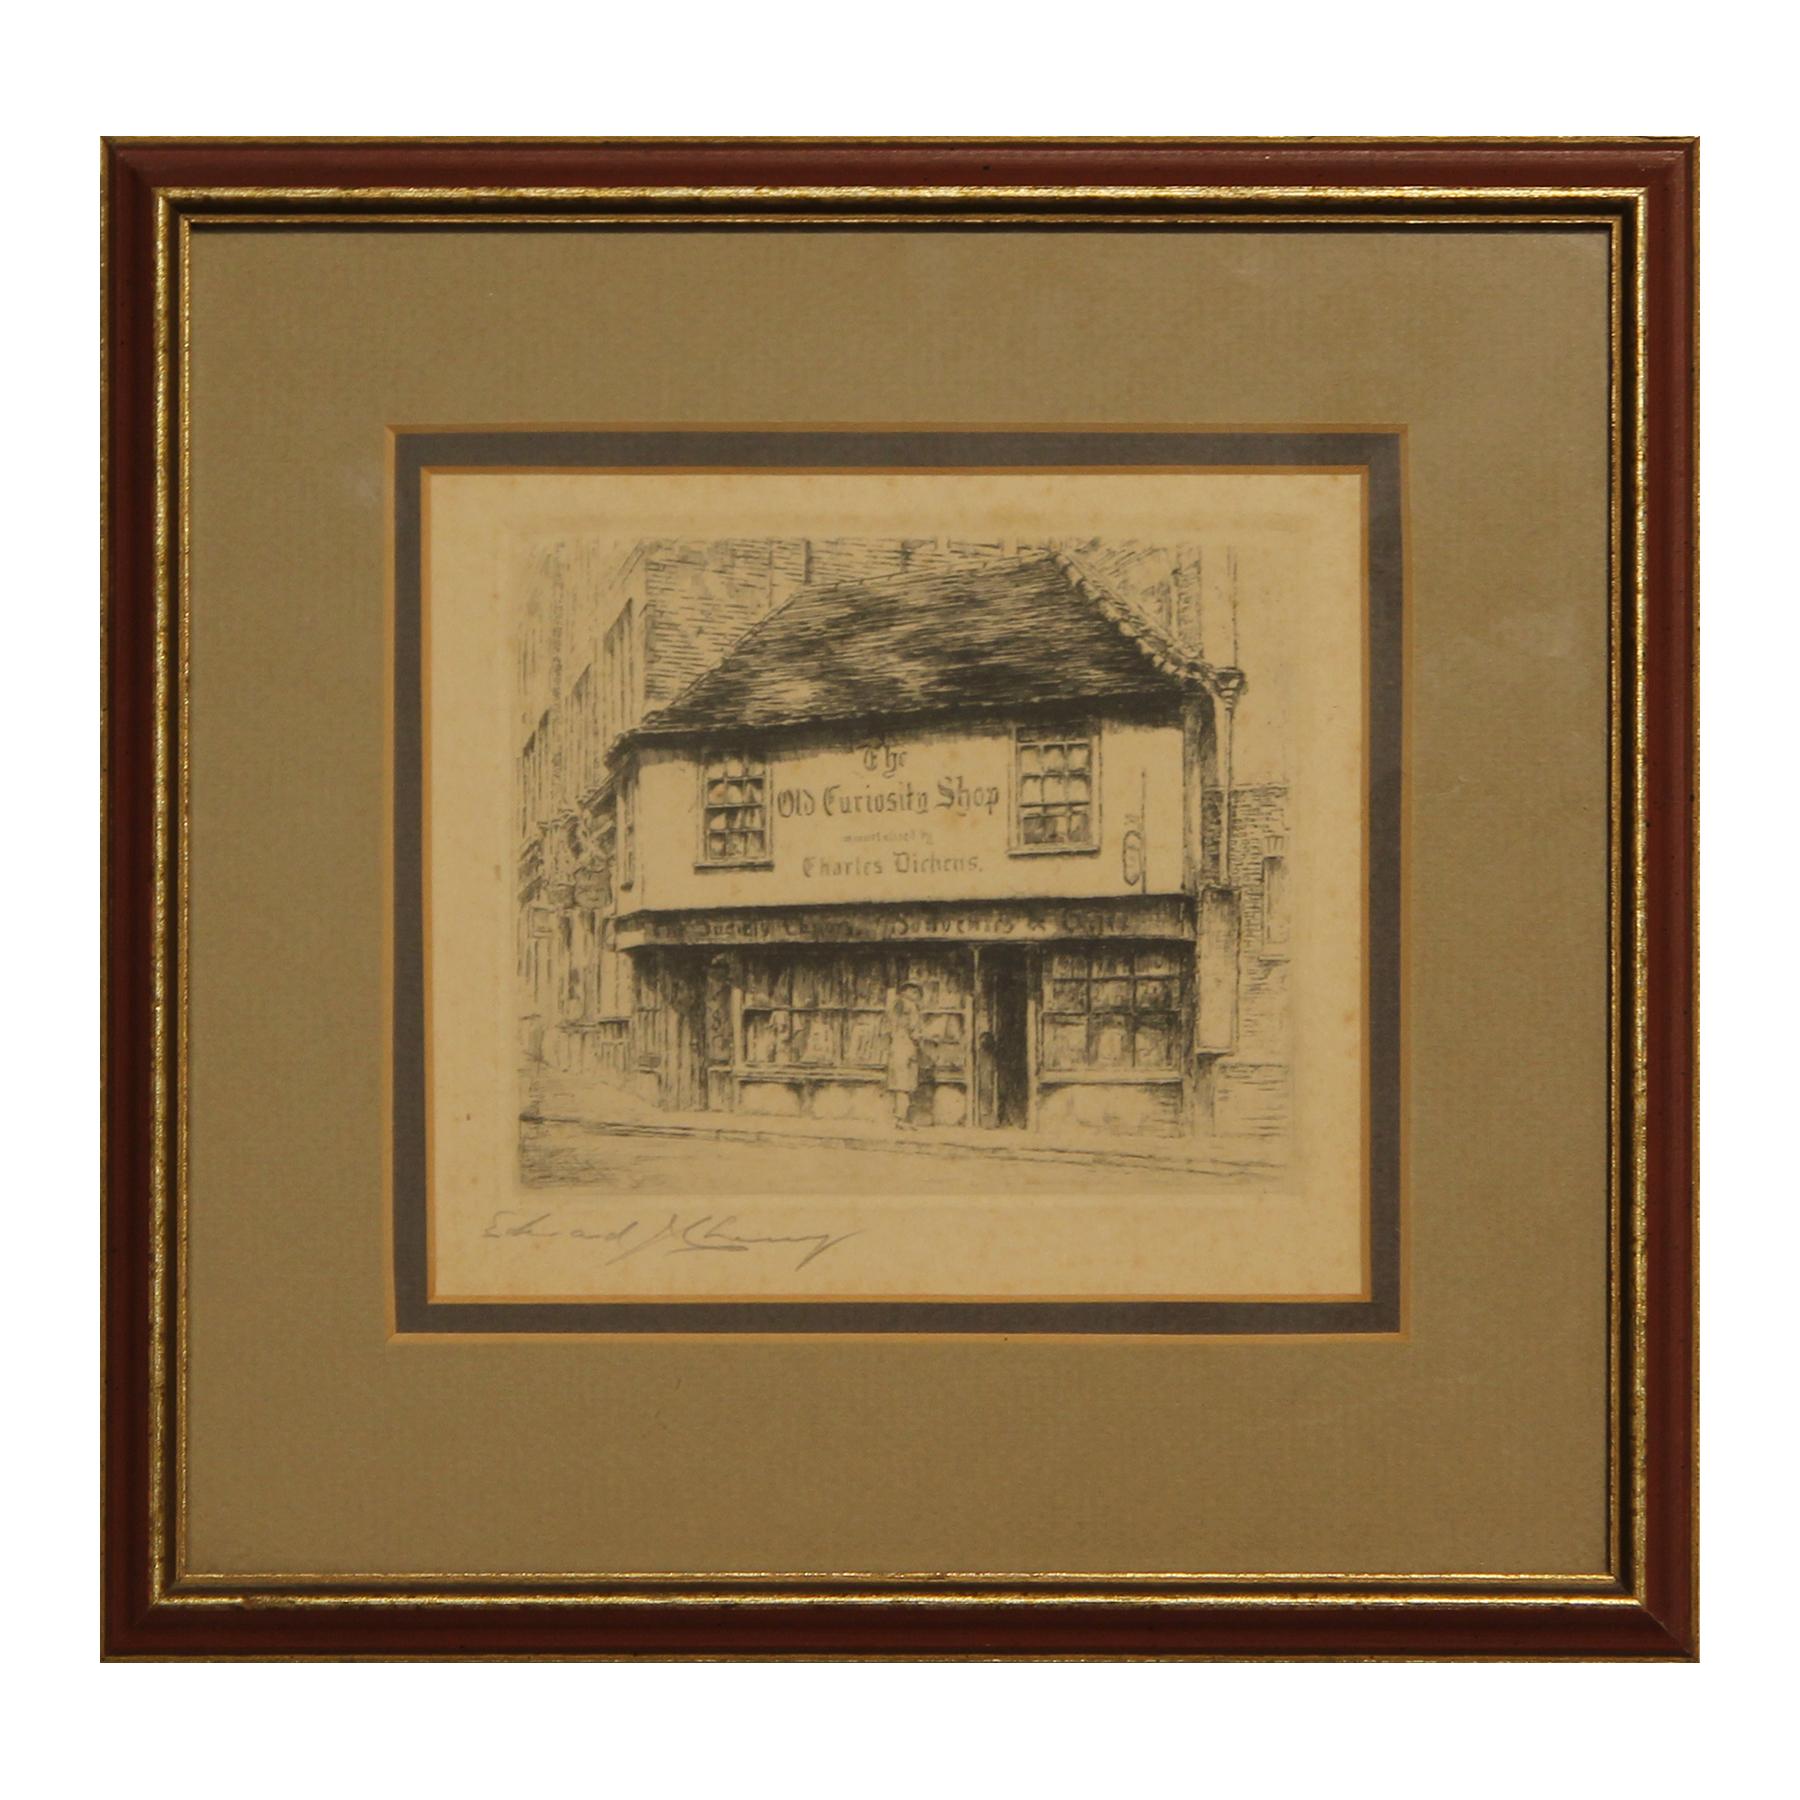 Edward J. Cherry Landscape Print - The Old Curiosity Shop Immortalized by Charles Dickens Realist Landscape Etching